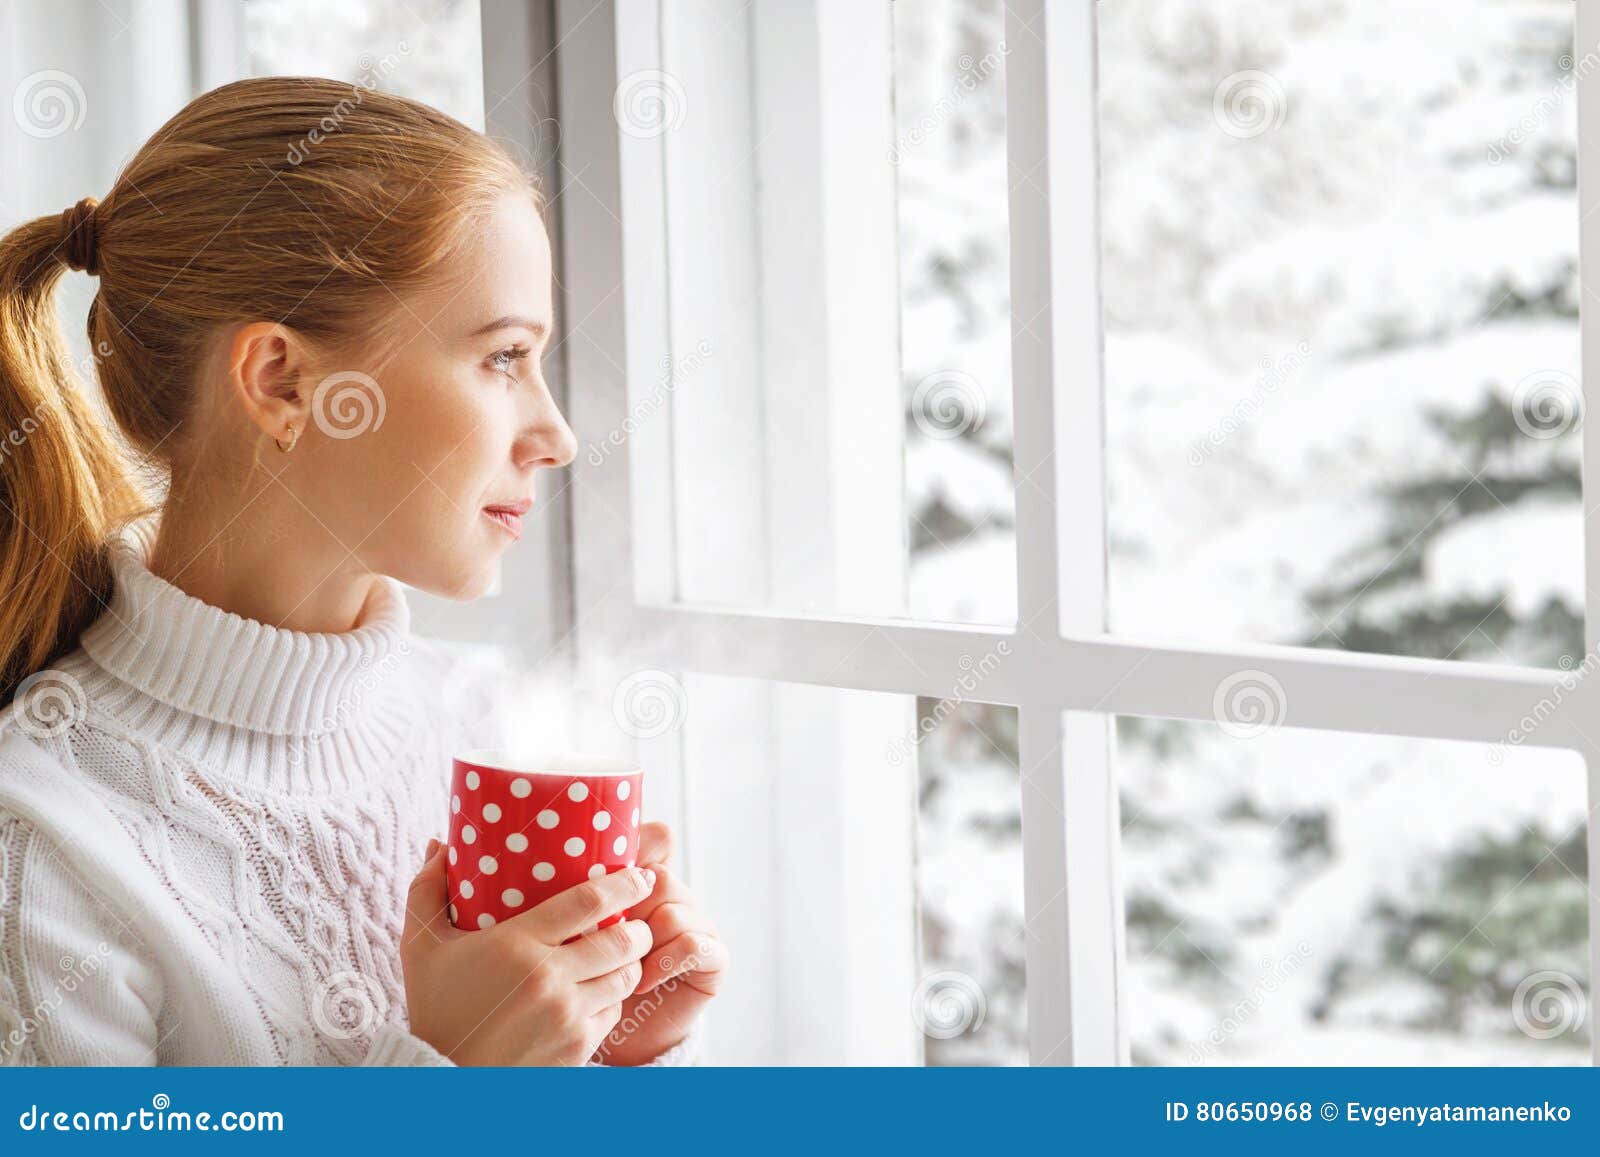 happy young woman with cup of hot tea in winter window christmas